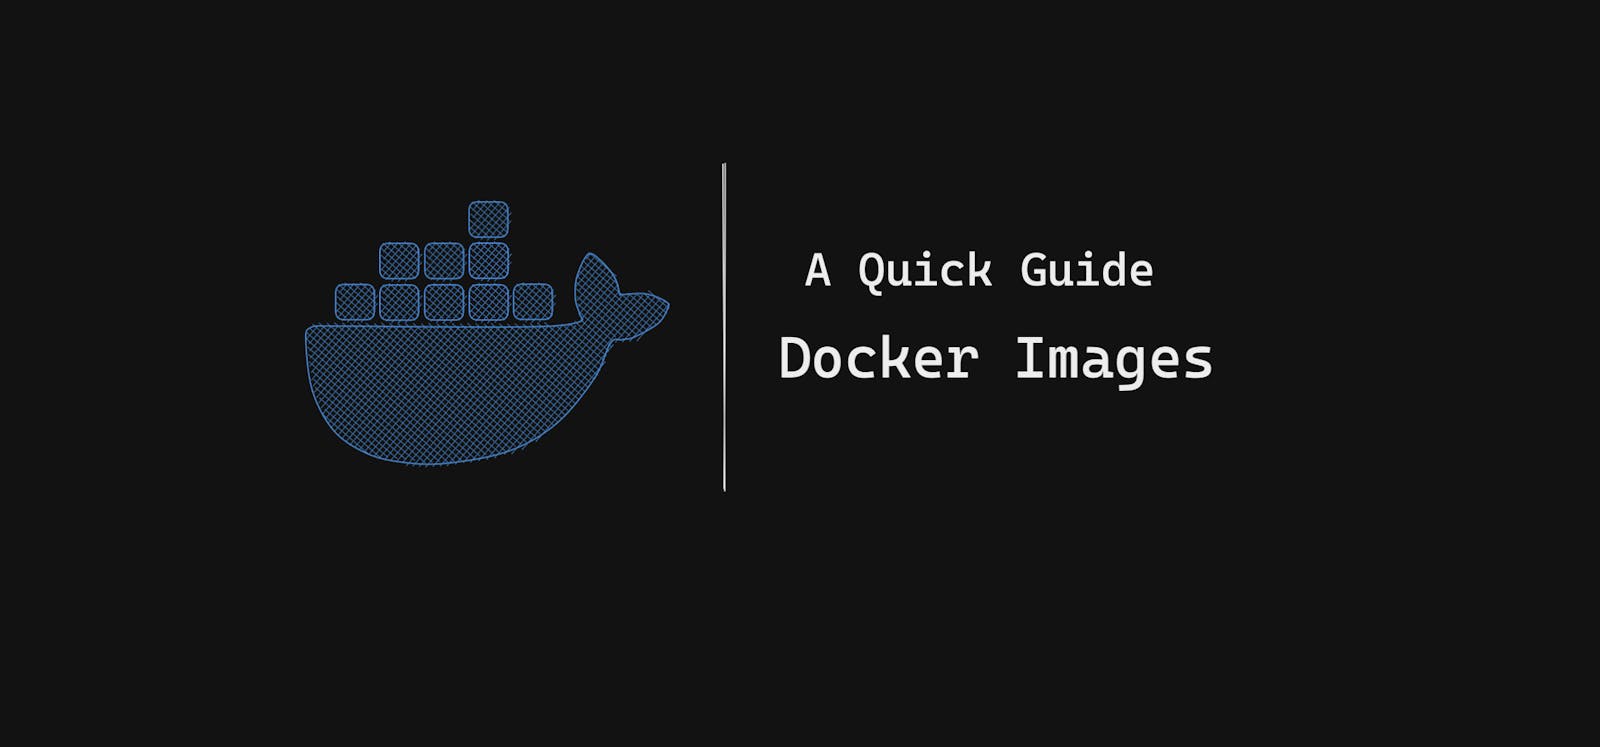 Docker Images: A Quick Guide